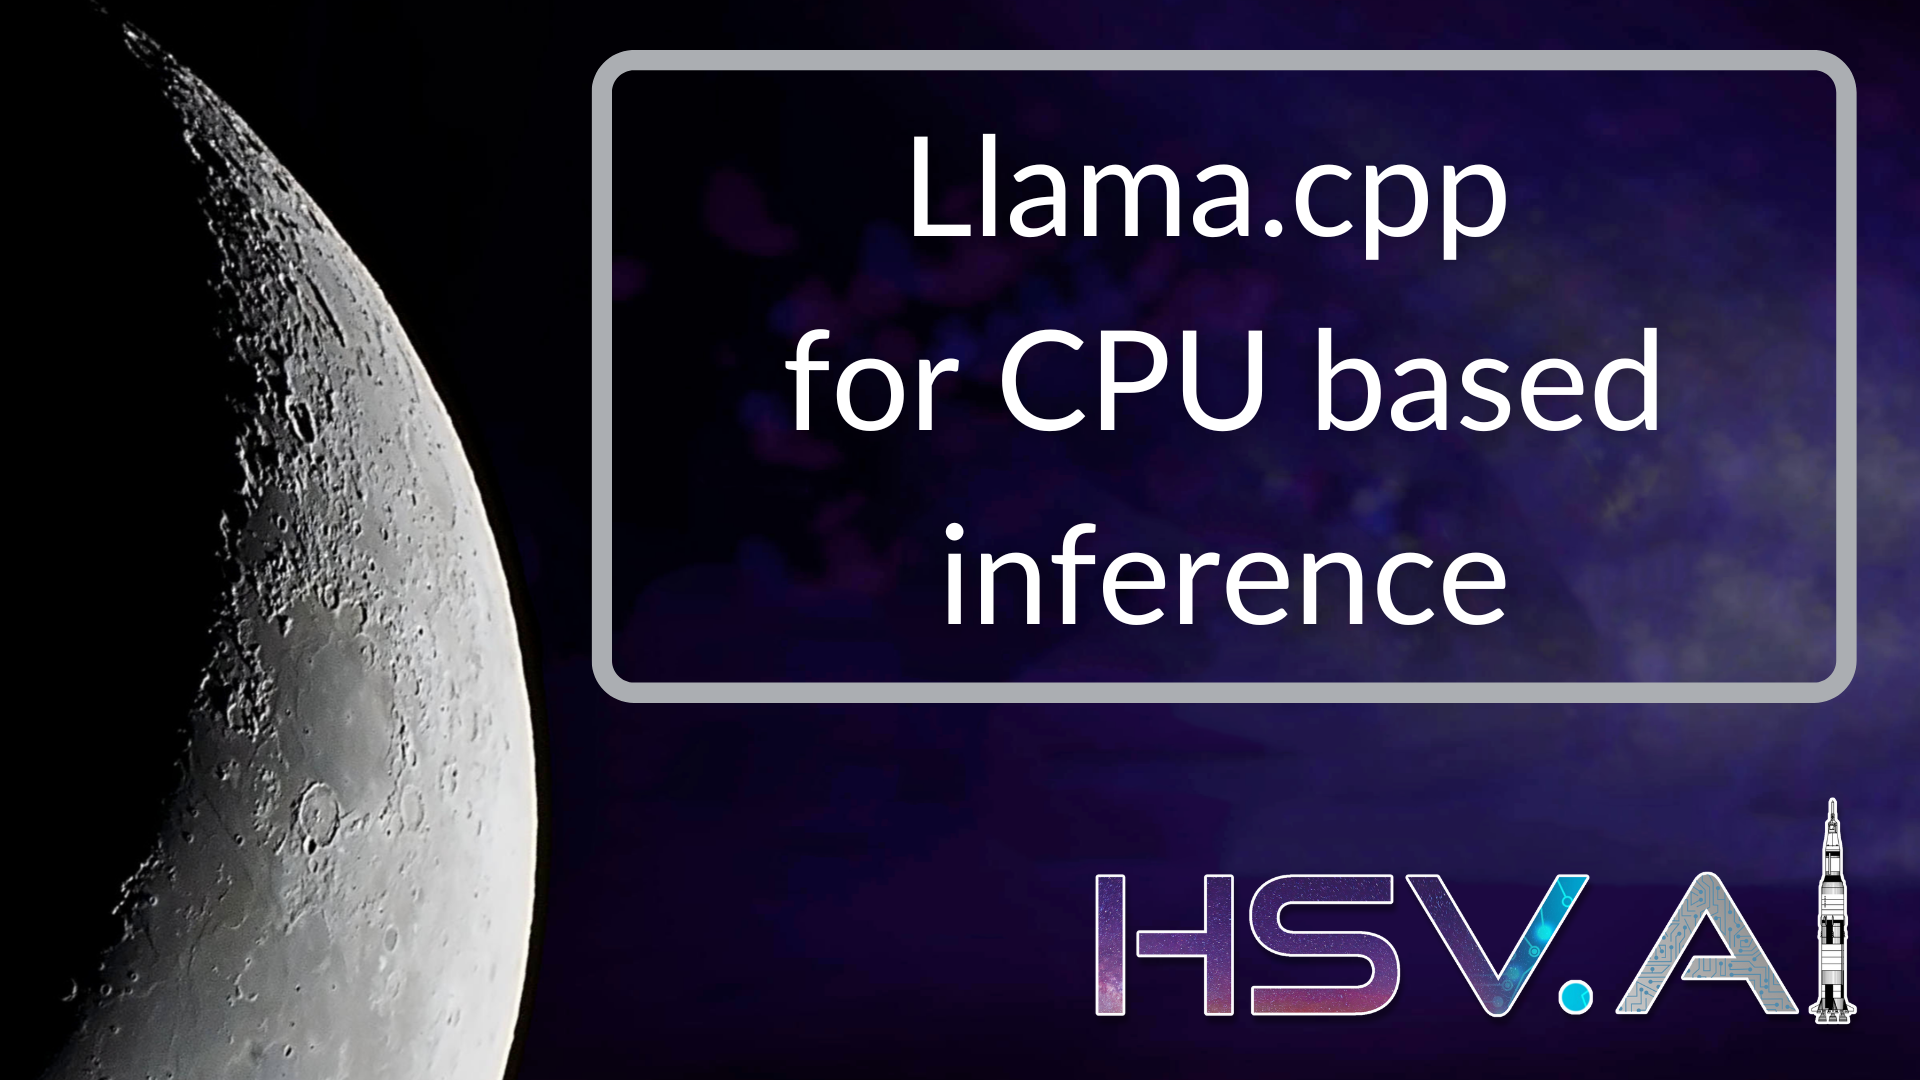 Llama.cpp for CPU based inference